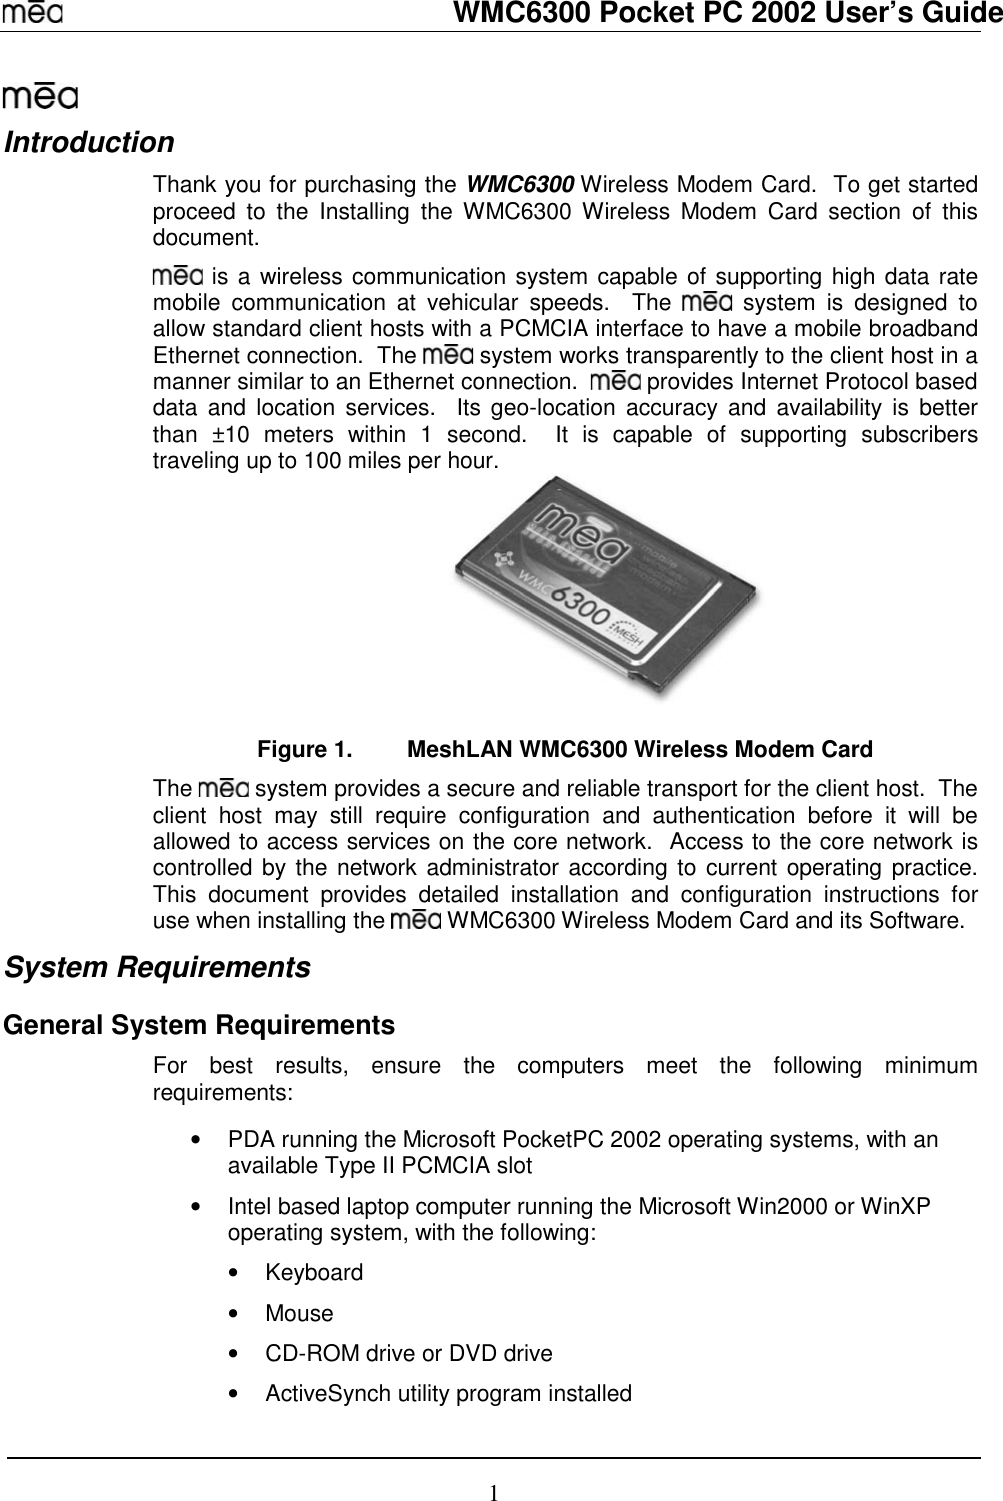   WMC6300 Pocket PC 2002 User’s Guide 1  Introduction Thank you for purchasing the WMC6300 Wireless Modem Card.  To get started proceed to the Installing the WMC6300 Wireless Modem Card section of this document.  is a wireless communication system capable of supporting high data rate mobile communication at vehicular speeds.  The   system is designed to allow standard client hosts with a PCMCIA interface to have a mobile broadband Ethernet connection.  The   system works transparently to the client host in a manner similar to an Ethernet connection.    provides Internet Protocol based data and location services.  Its geo-location accuracy and availability is better than ±10 meters within 1 second.  It is capable of supporting subscribers traveling up to 100 miles per hour.  Figure 1.  MeshLAN WMC6300 Wireless Modem Card The   system provides a secure and reliable transport for the client host.  The client host may still require configuration and authentication before it will be allowed to access services on the core network.  Access to the core network is controlled by the network administrator according to current operating practice.  This document provides detailed installation and configuration instructions for use when installing the   WMC6300 Wireless Modem Card and its Software.  System Requirements General System Requirements For best results, ensure the computers meet the following minimum requirements:  •  PDA running the Microsoft PocketPC 2002 operating systems, with an available Type II PCMCIA slot •  Intel based laptop computer running the Microsoft Win2000 or WinXP operating system, with the following: • Keyboard • Mouse •  CD-ROM drive or DVD drive •  ActiveSynch utility program installed 